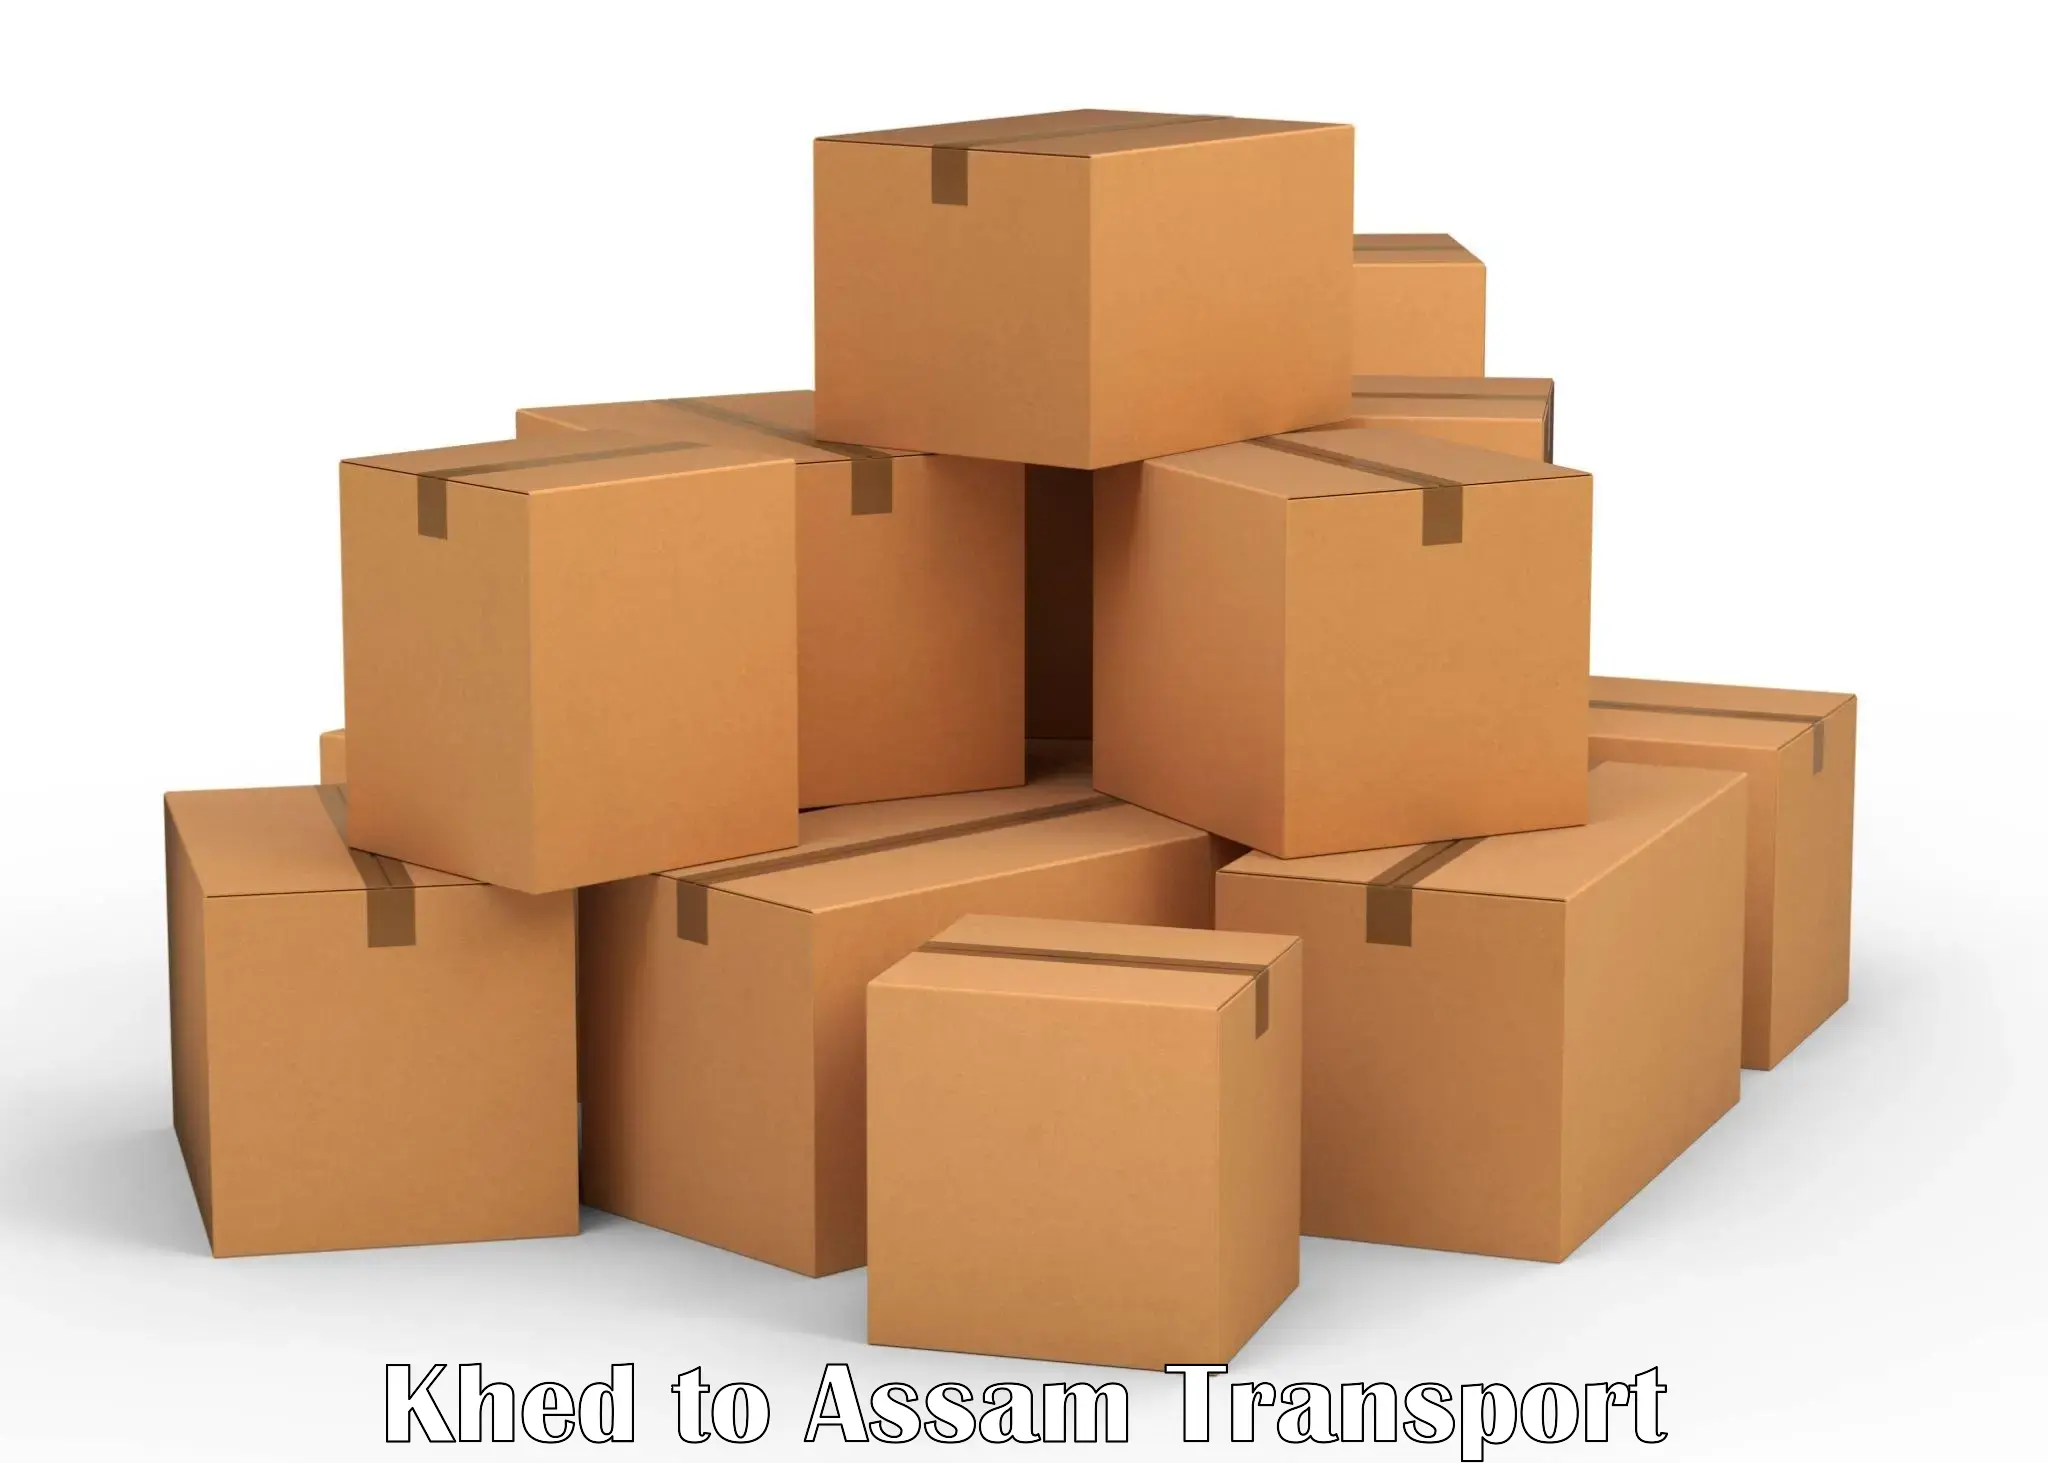 Domestic goods transportation services Khed to Lala Assam